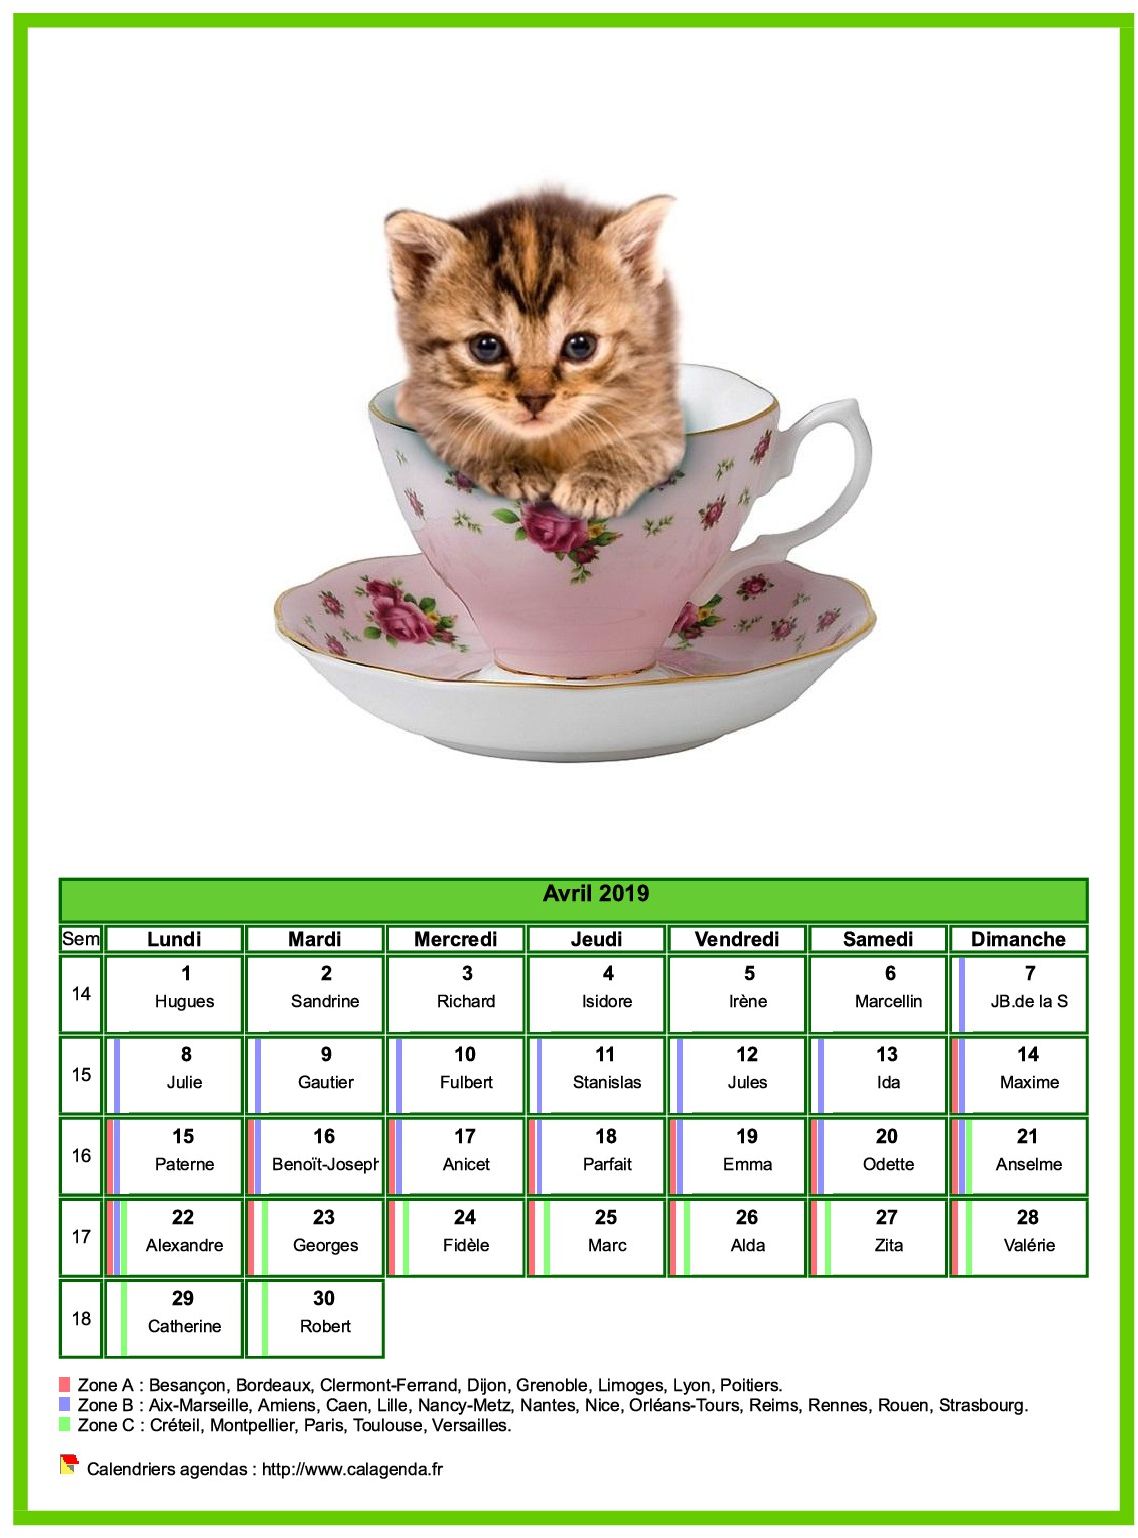 Calendrier avril 2019 chats